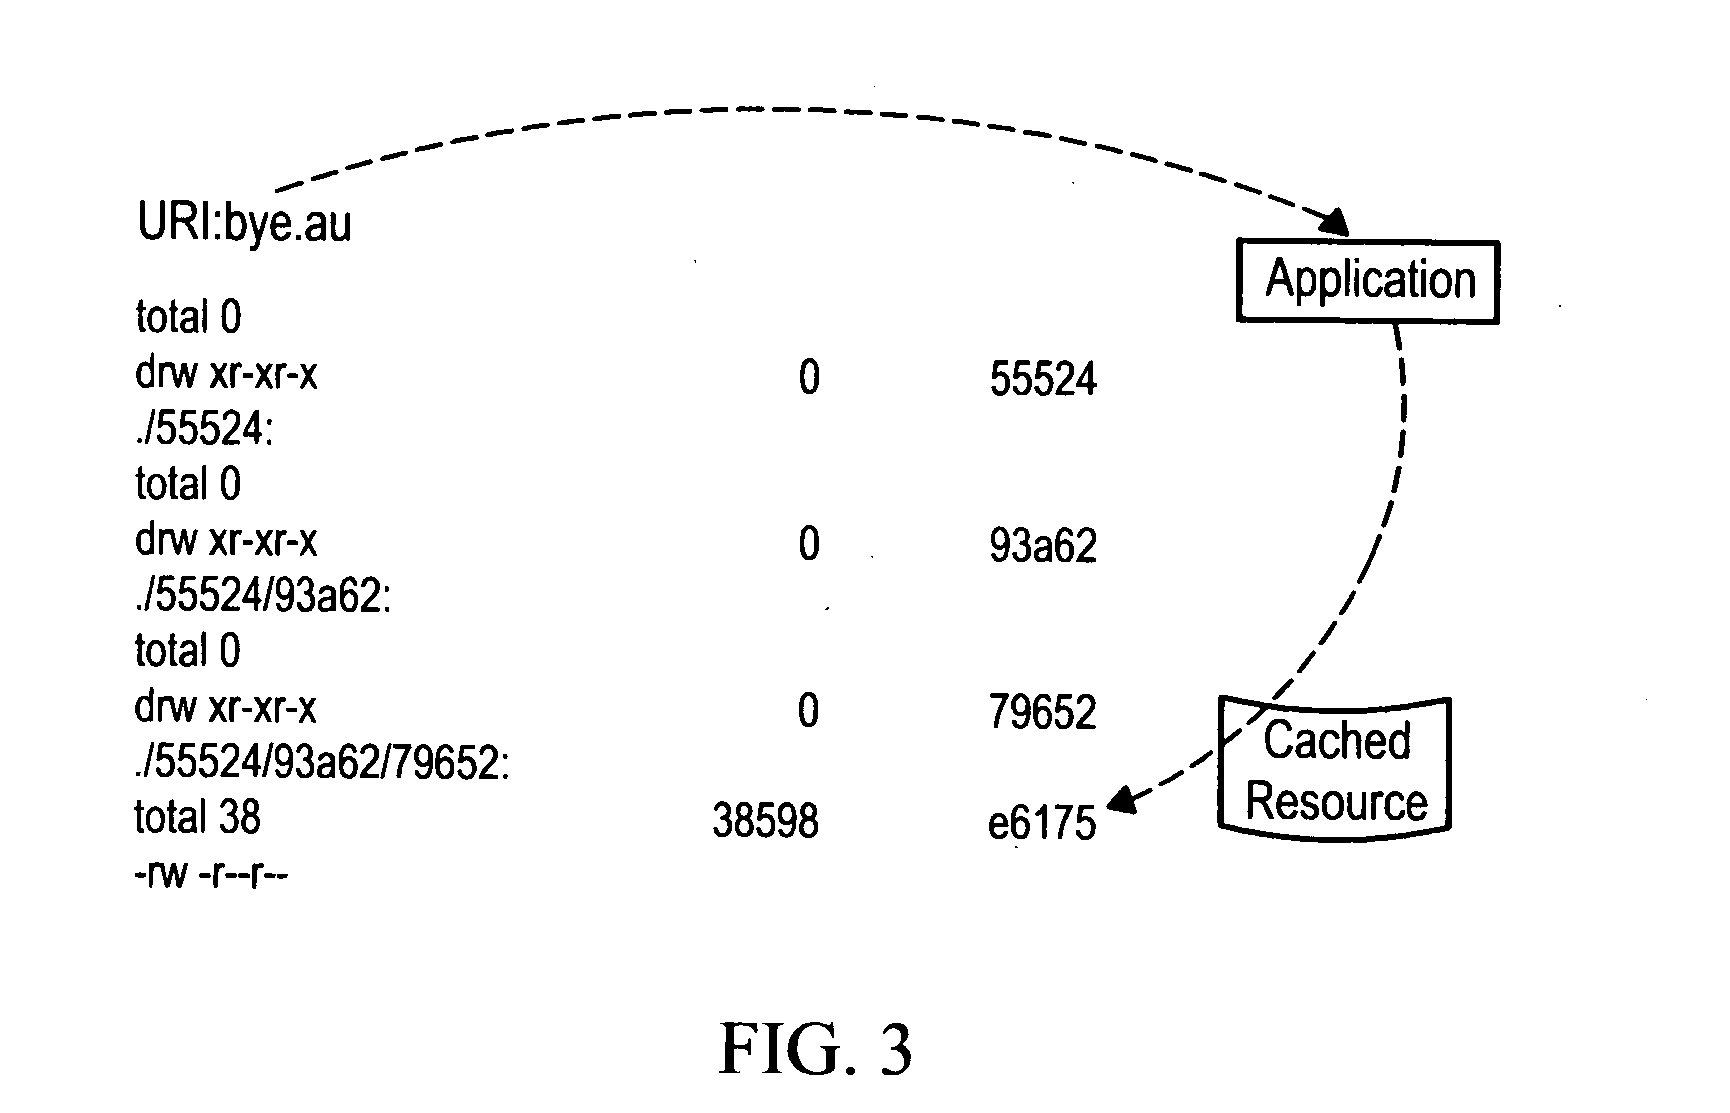 System and method for generating a unique, file system independent key from a URI (Universal Resource Identifier) for use in an index-less VoiceXML browser caching mechanism